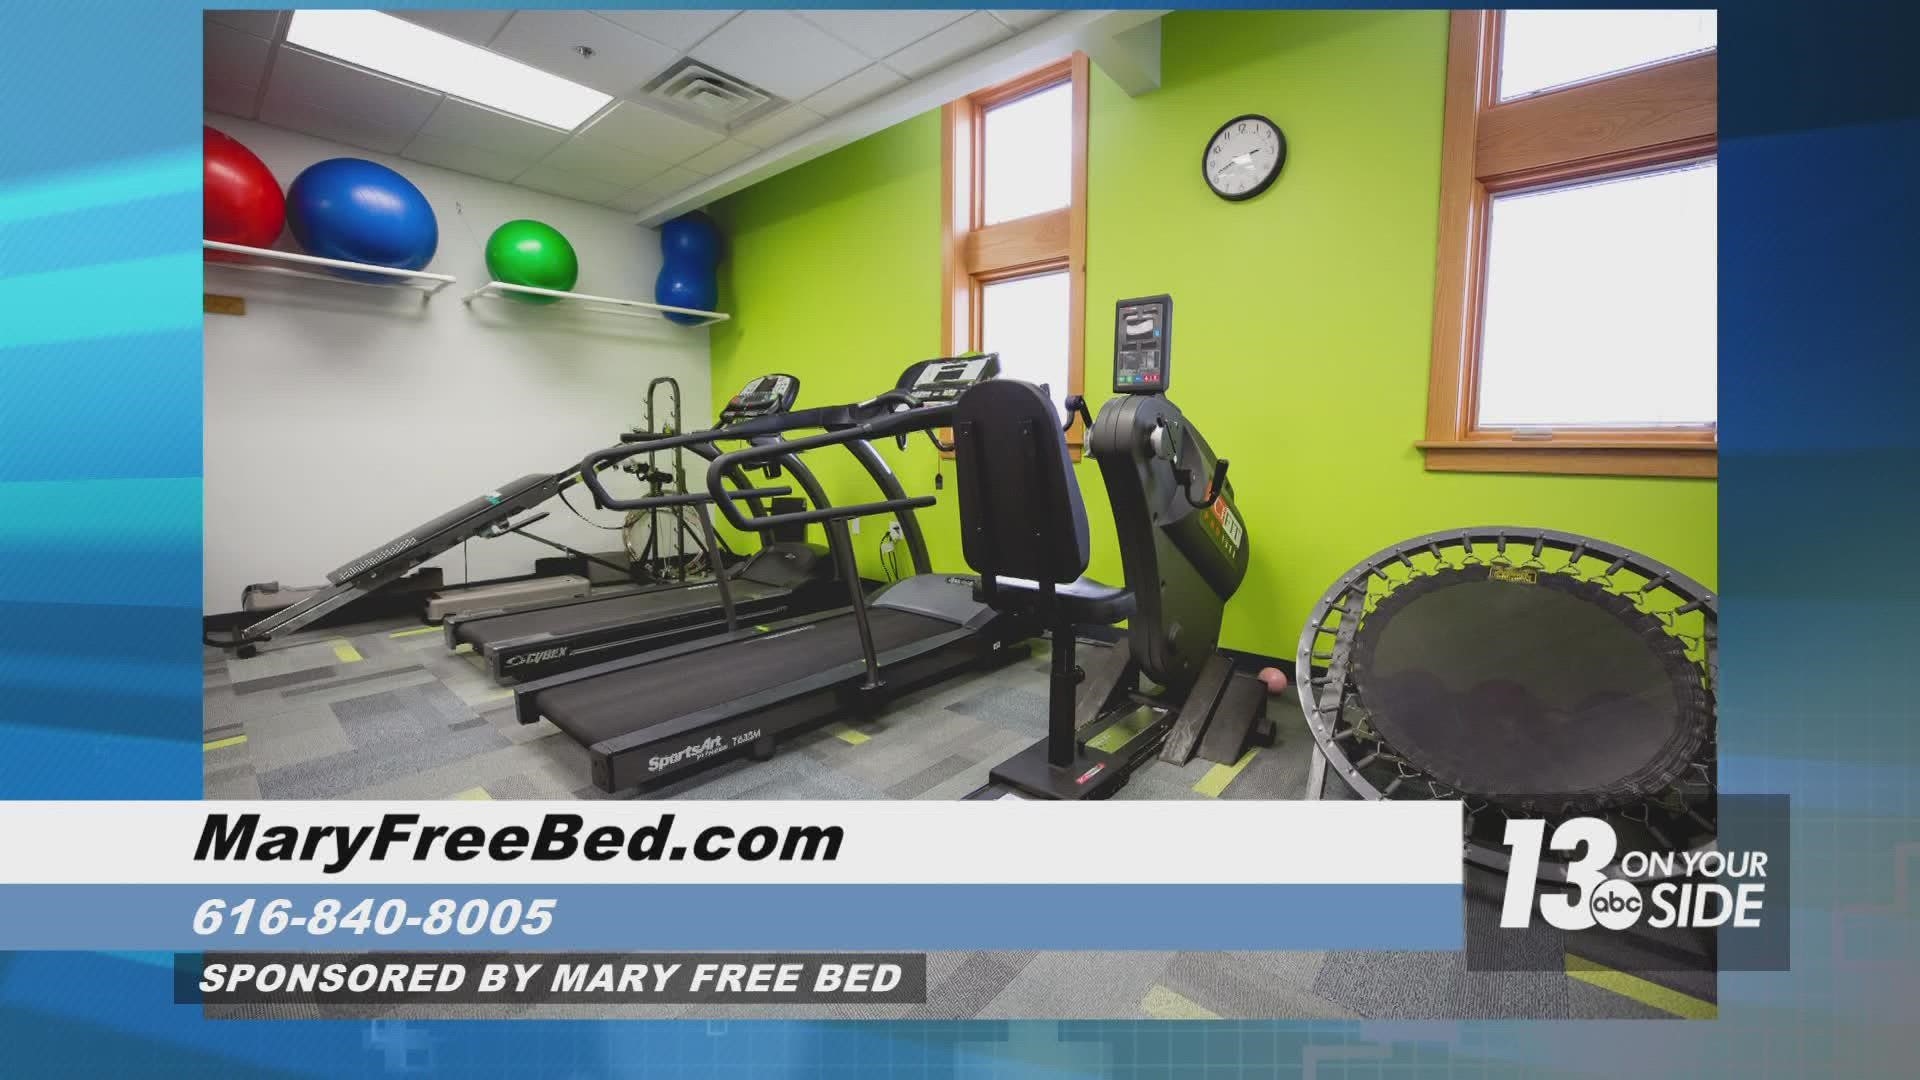 No matter where it hurts, Mary Free Bed Rehabilitation can help.